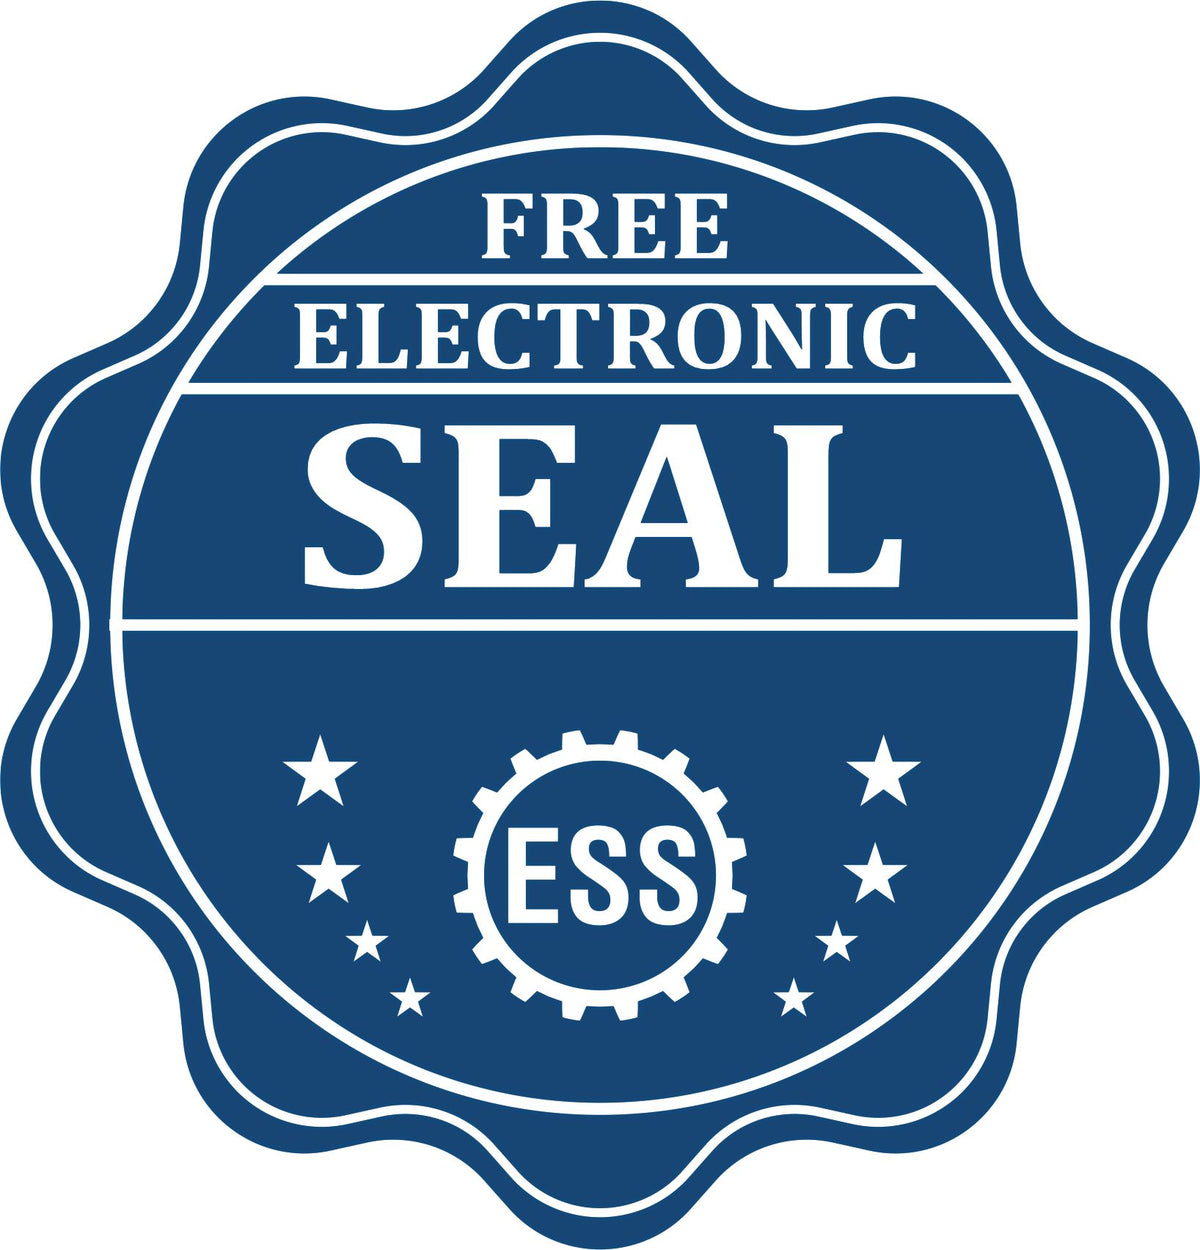 A badge showing a free electronic seal for the Premium MaxLight Pre-Inked North Carolina Landscape Architectural Stamp with stars and the ESS gear on the emblem.